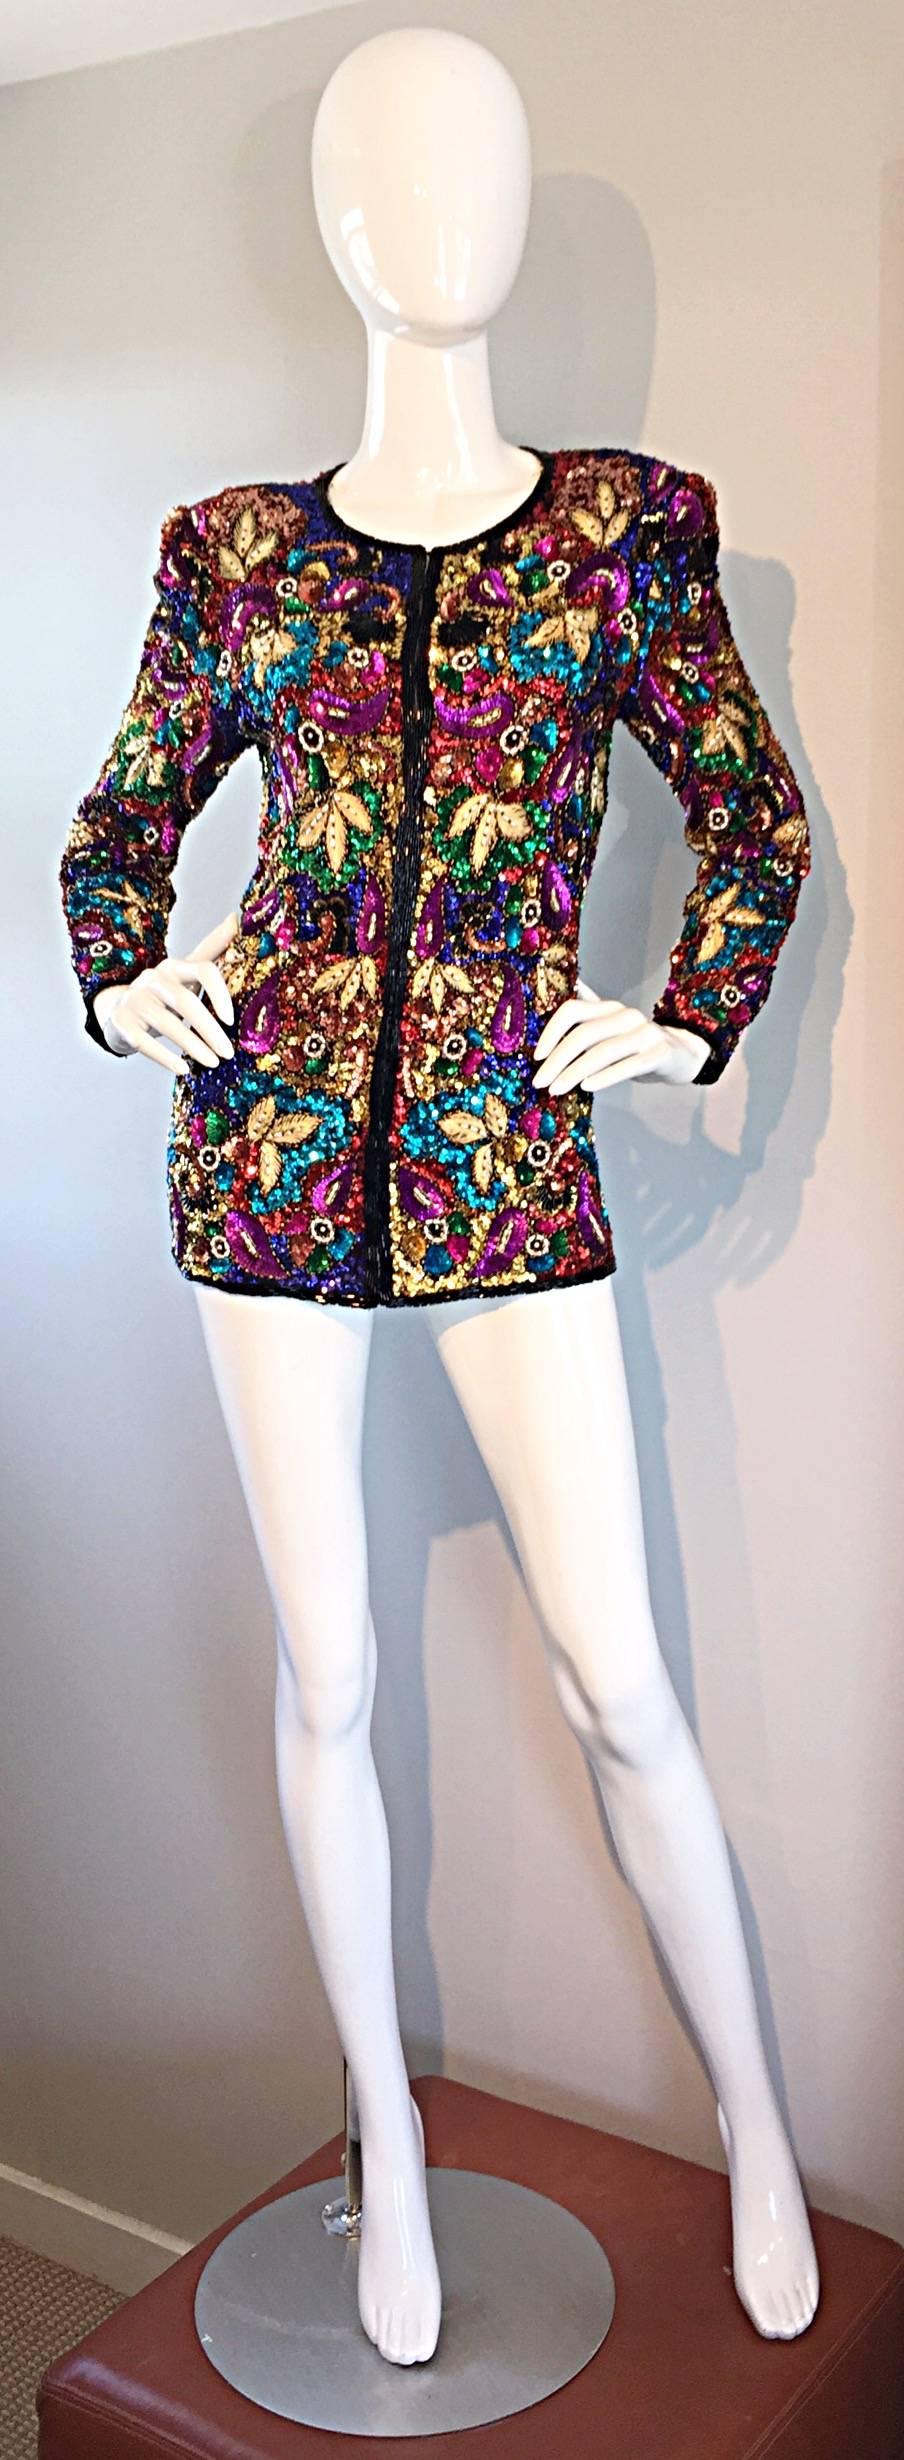 Sensational vintage silk jacket! Features thousands of hand-sewn sequins and beads throughout. Vibrant pops of color. Wonderful tailored fit, with hook-and-eye closures up the bodice. Features shoulder pads, which can easily be snipped out, if